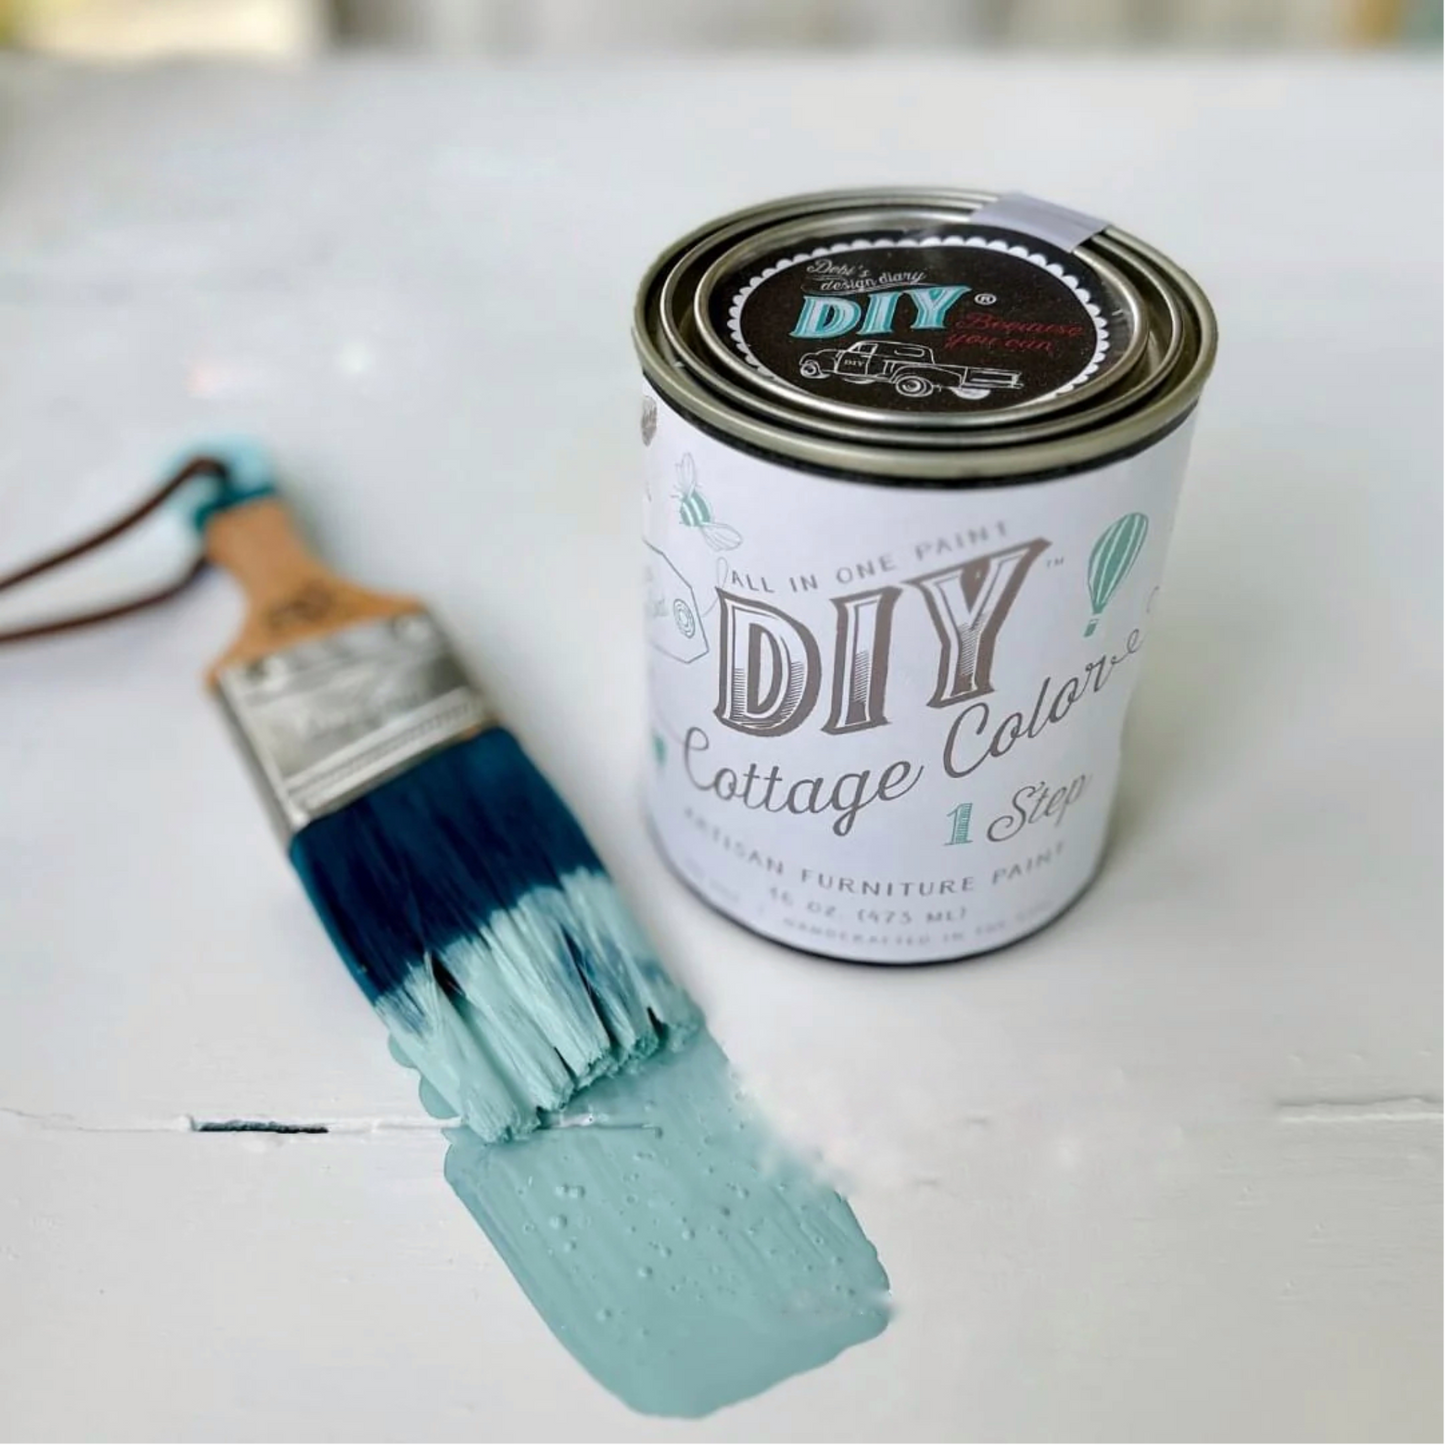 "Blue Hills" Cottage Color Paint Curated by Jami Ray Vintage for DIY Paiant. Available in Pints at Milton's Daughter.